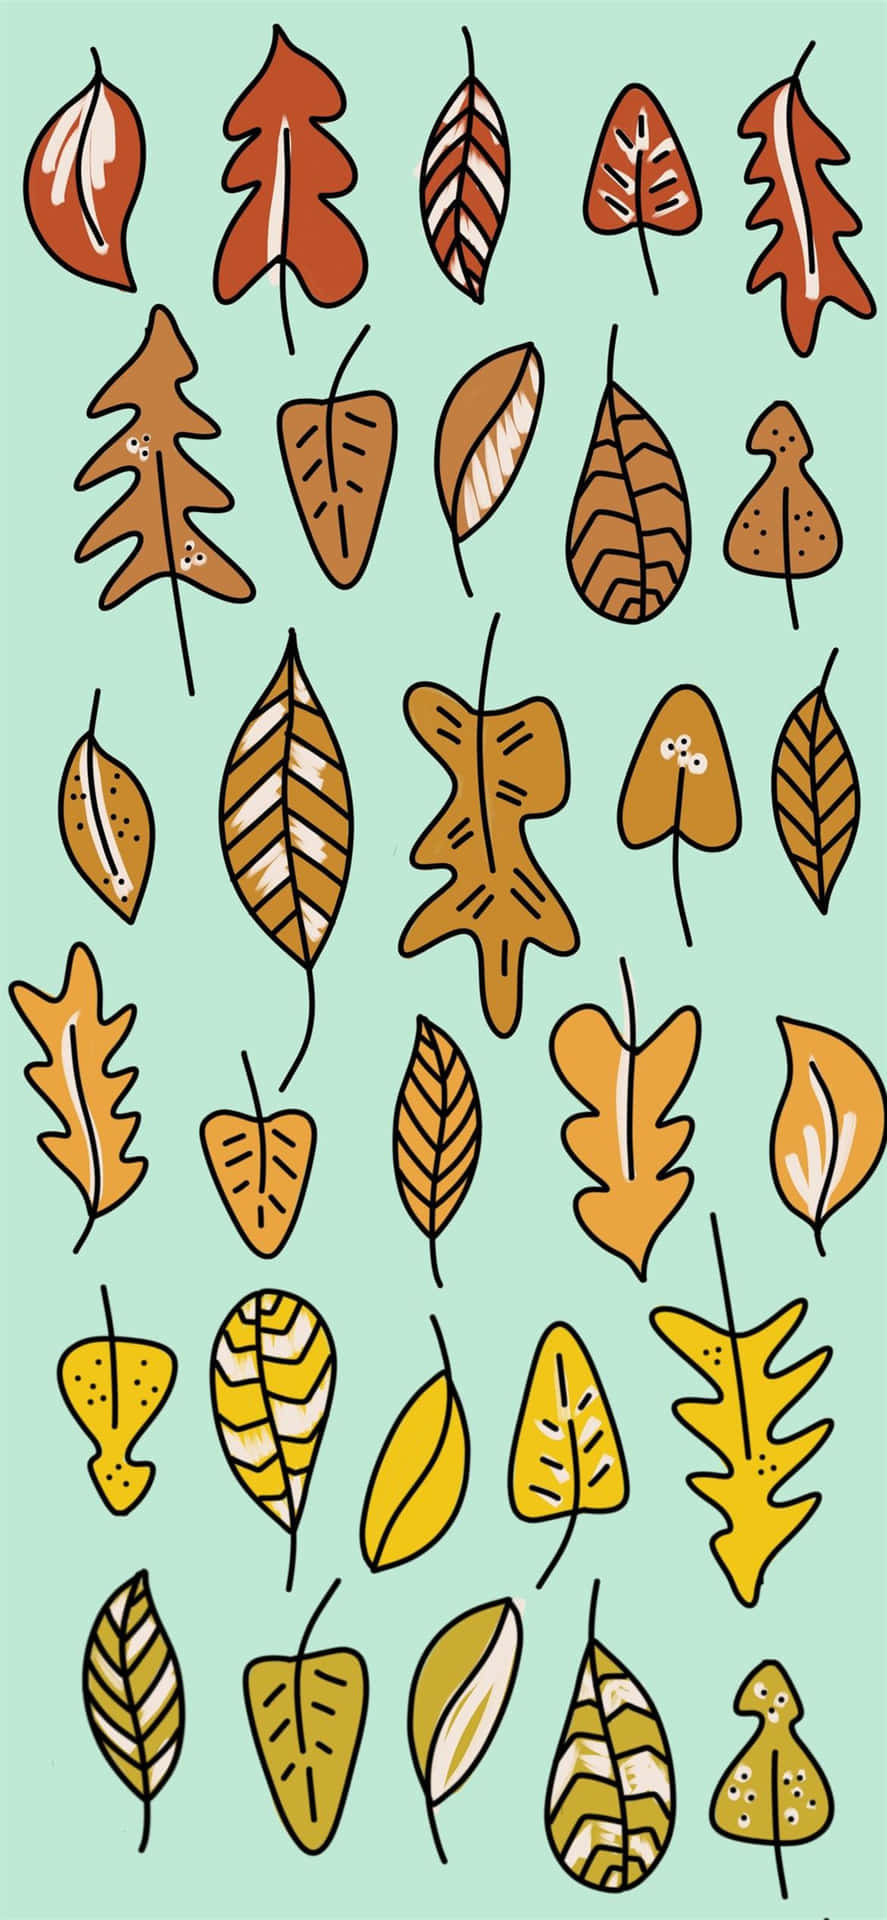 Add some color and fun to your iPhone with this adorable pattern Wallpaper